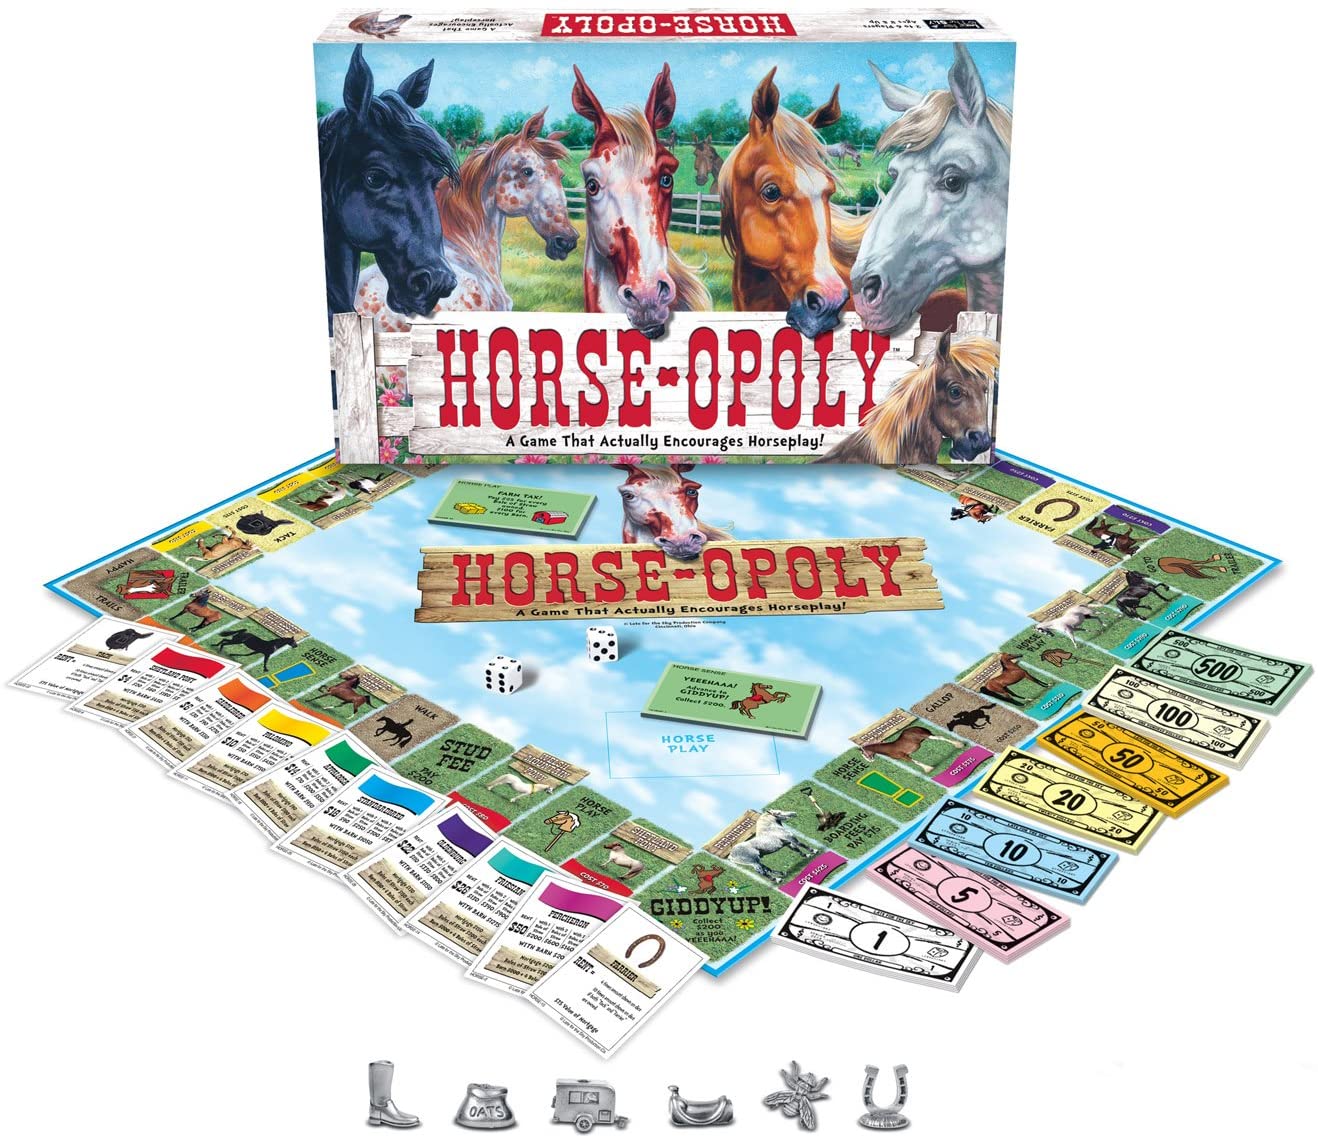 Monopoly But With Horses? Take My Money!